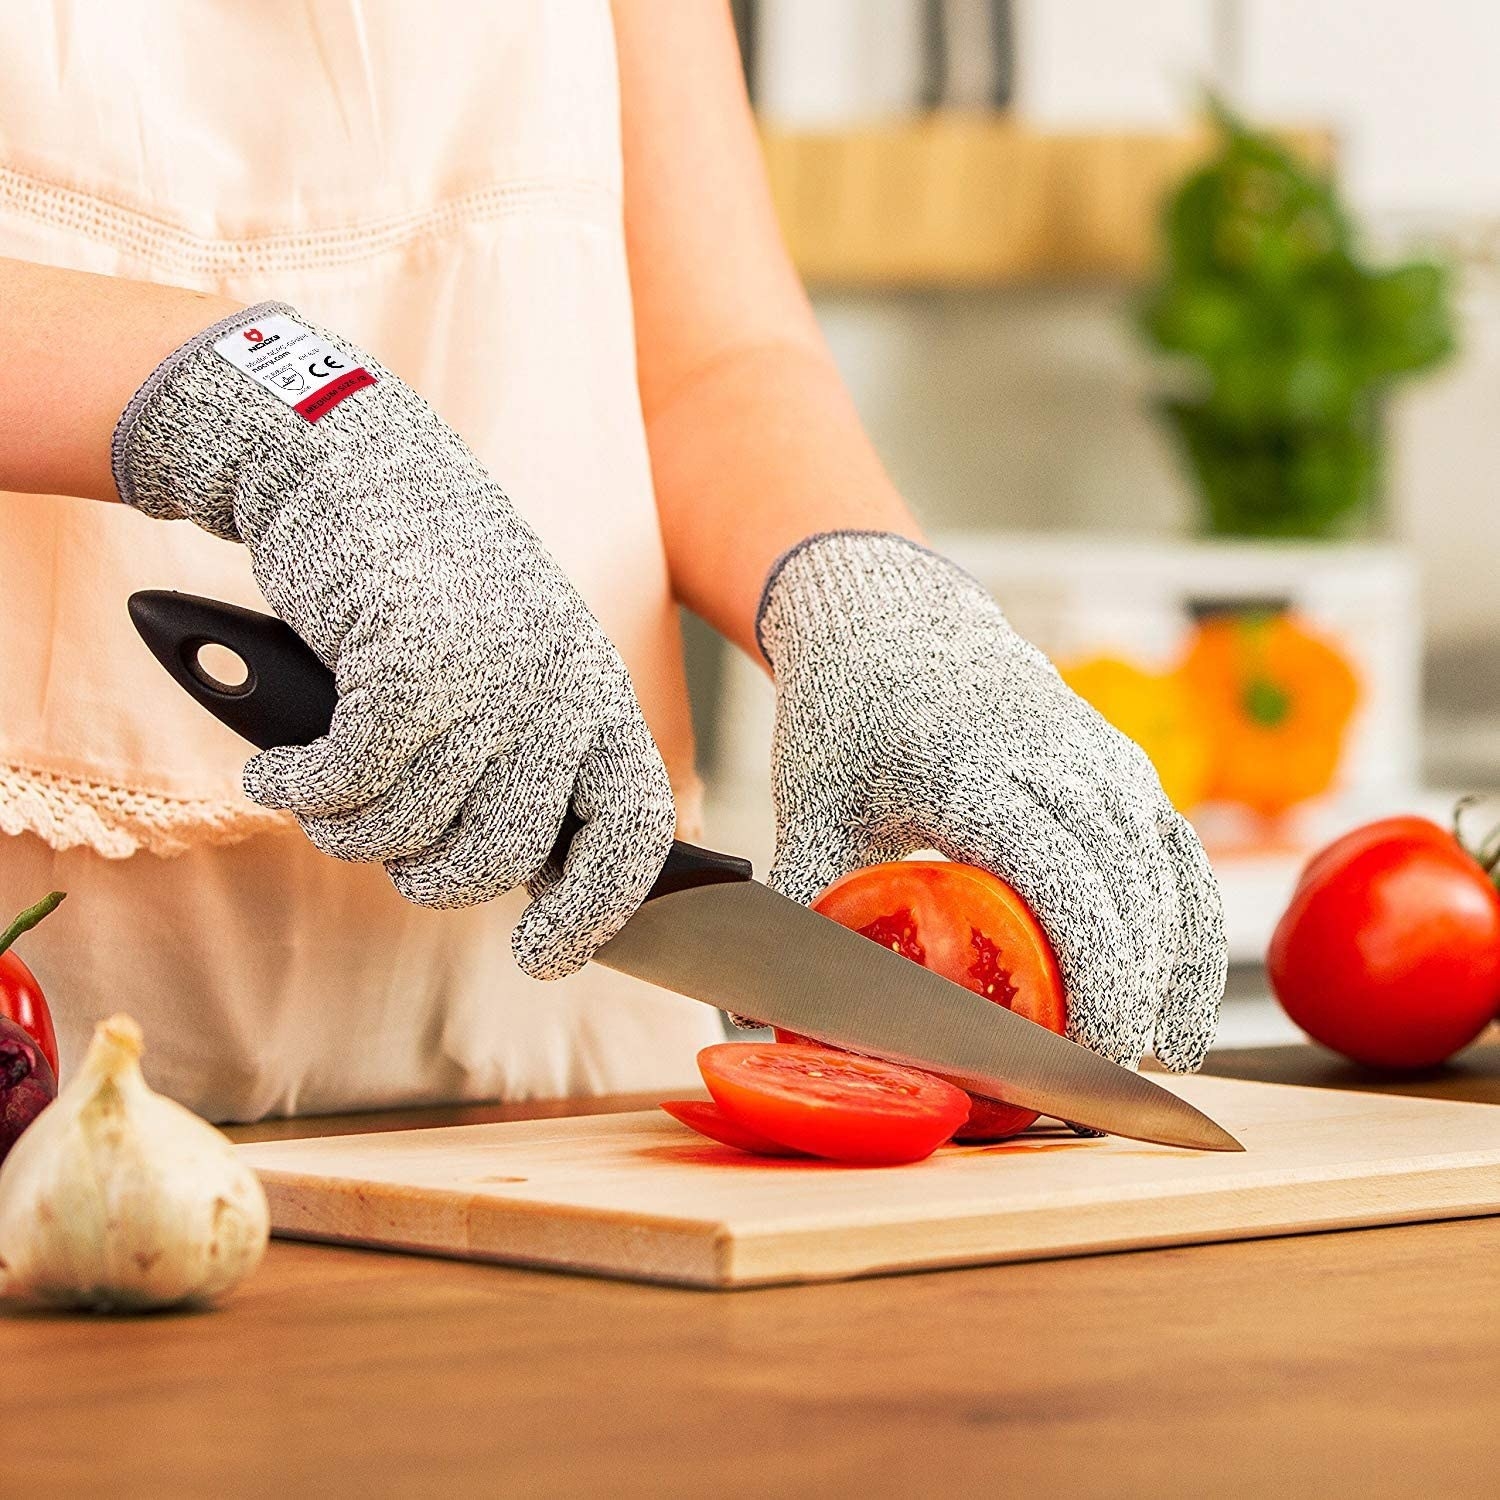 A person wearing  thick gloves while slicing a tomato with a large knife